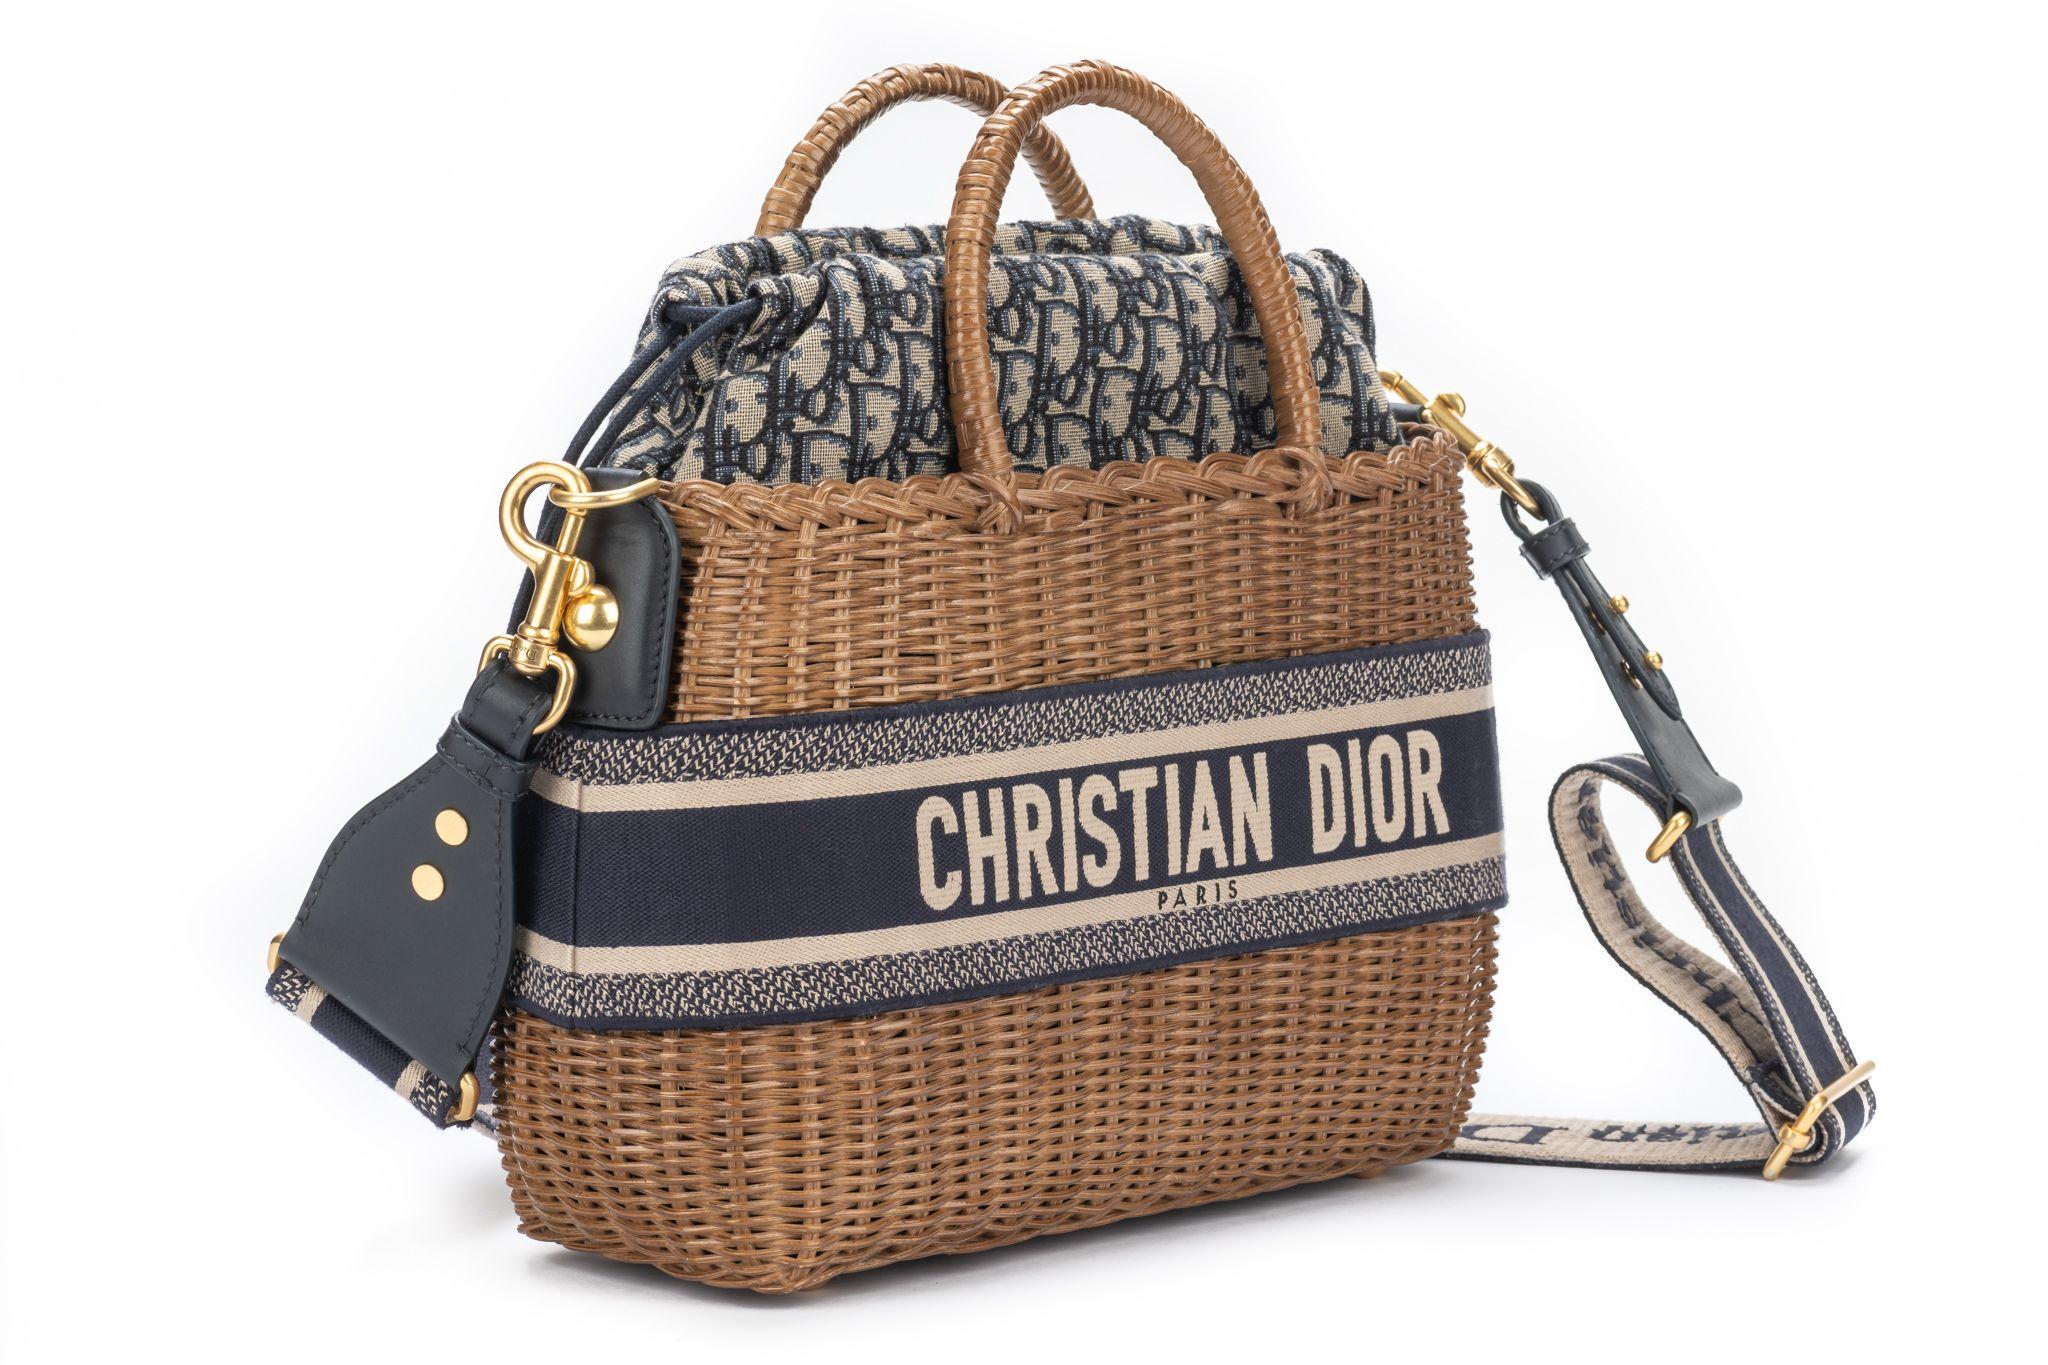 DIOR new Wicker Oblique Basket Bag in Blue. This bag is crafted of Dior monogram canvas and blue leather trim. The bag features a gold chain strap (20'), handles on top (4.5') and a leather cinch cord closure. The interior opens to a Dior monogram